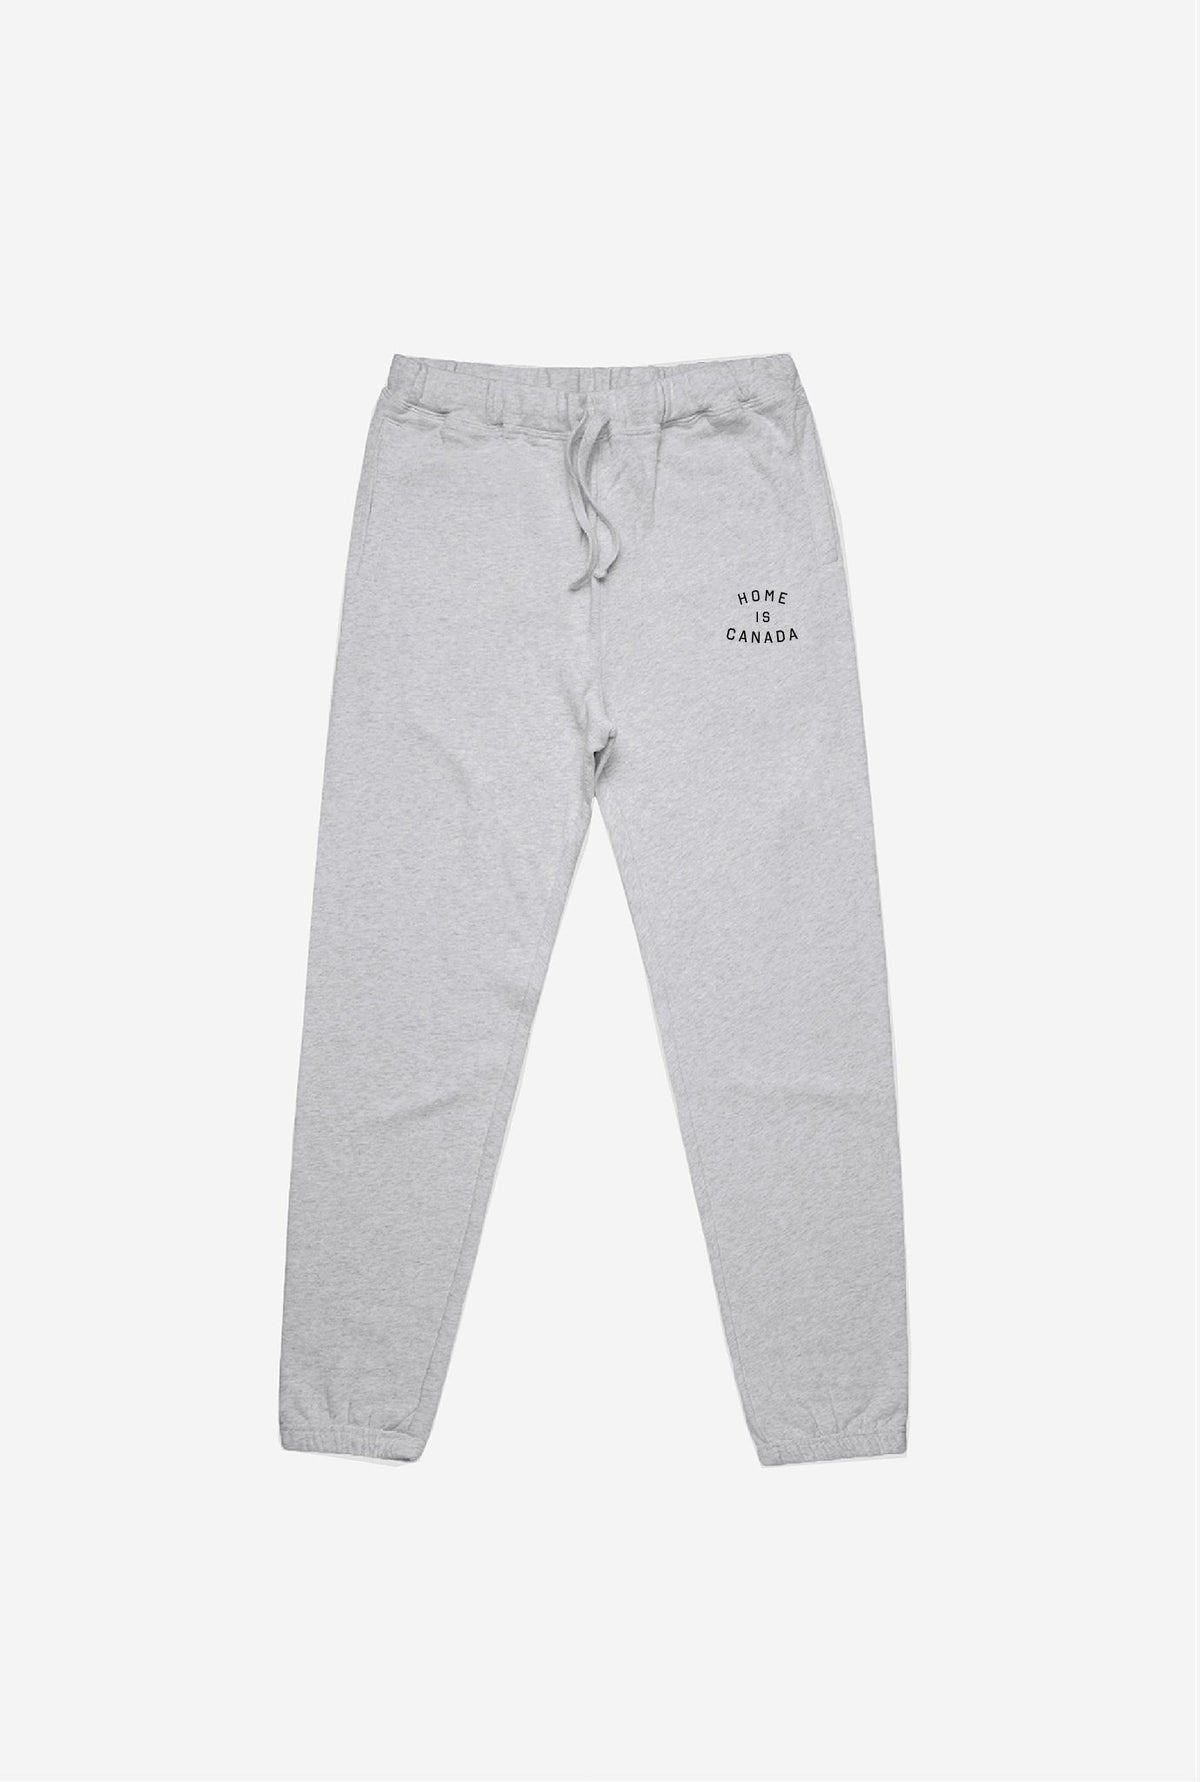 Home is Canada Jogger - Grey